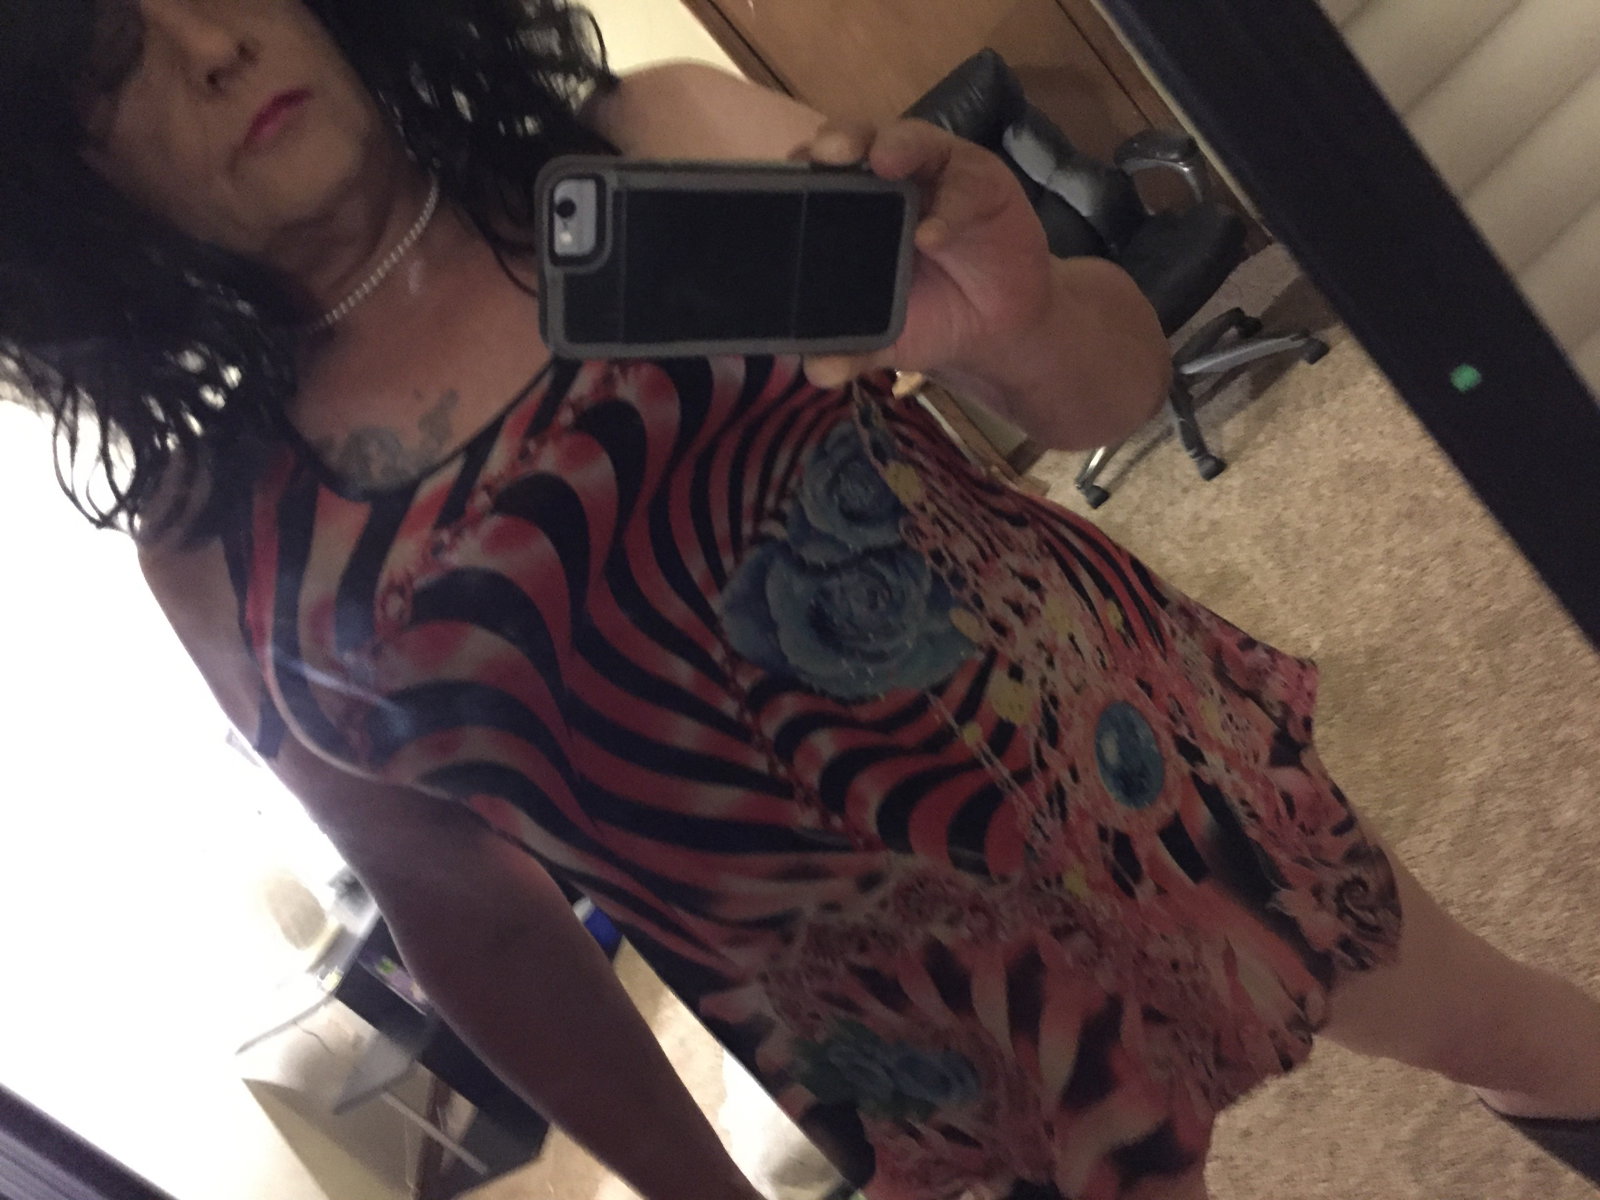 Watch the Photo by Sassycharlene666 with the username @Sassycharlene666t, who is a verified user, posted on January 2, 2021. The post is about the topic Home Made Amateurs.